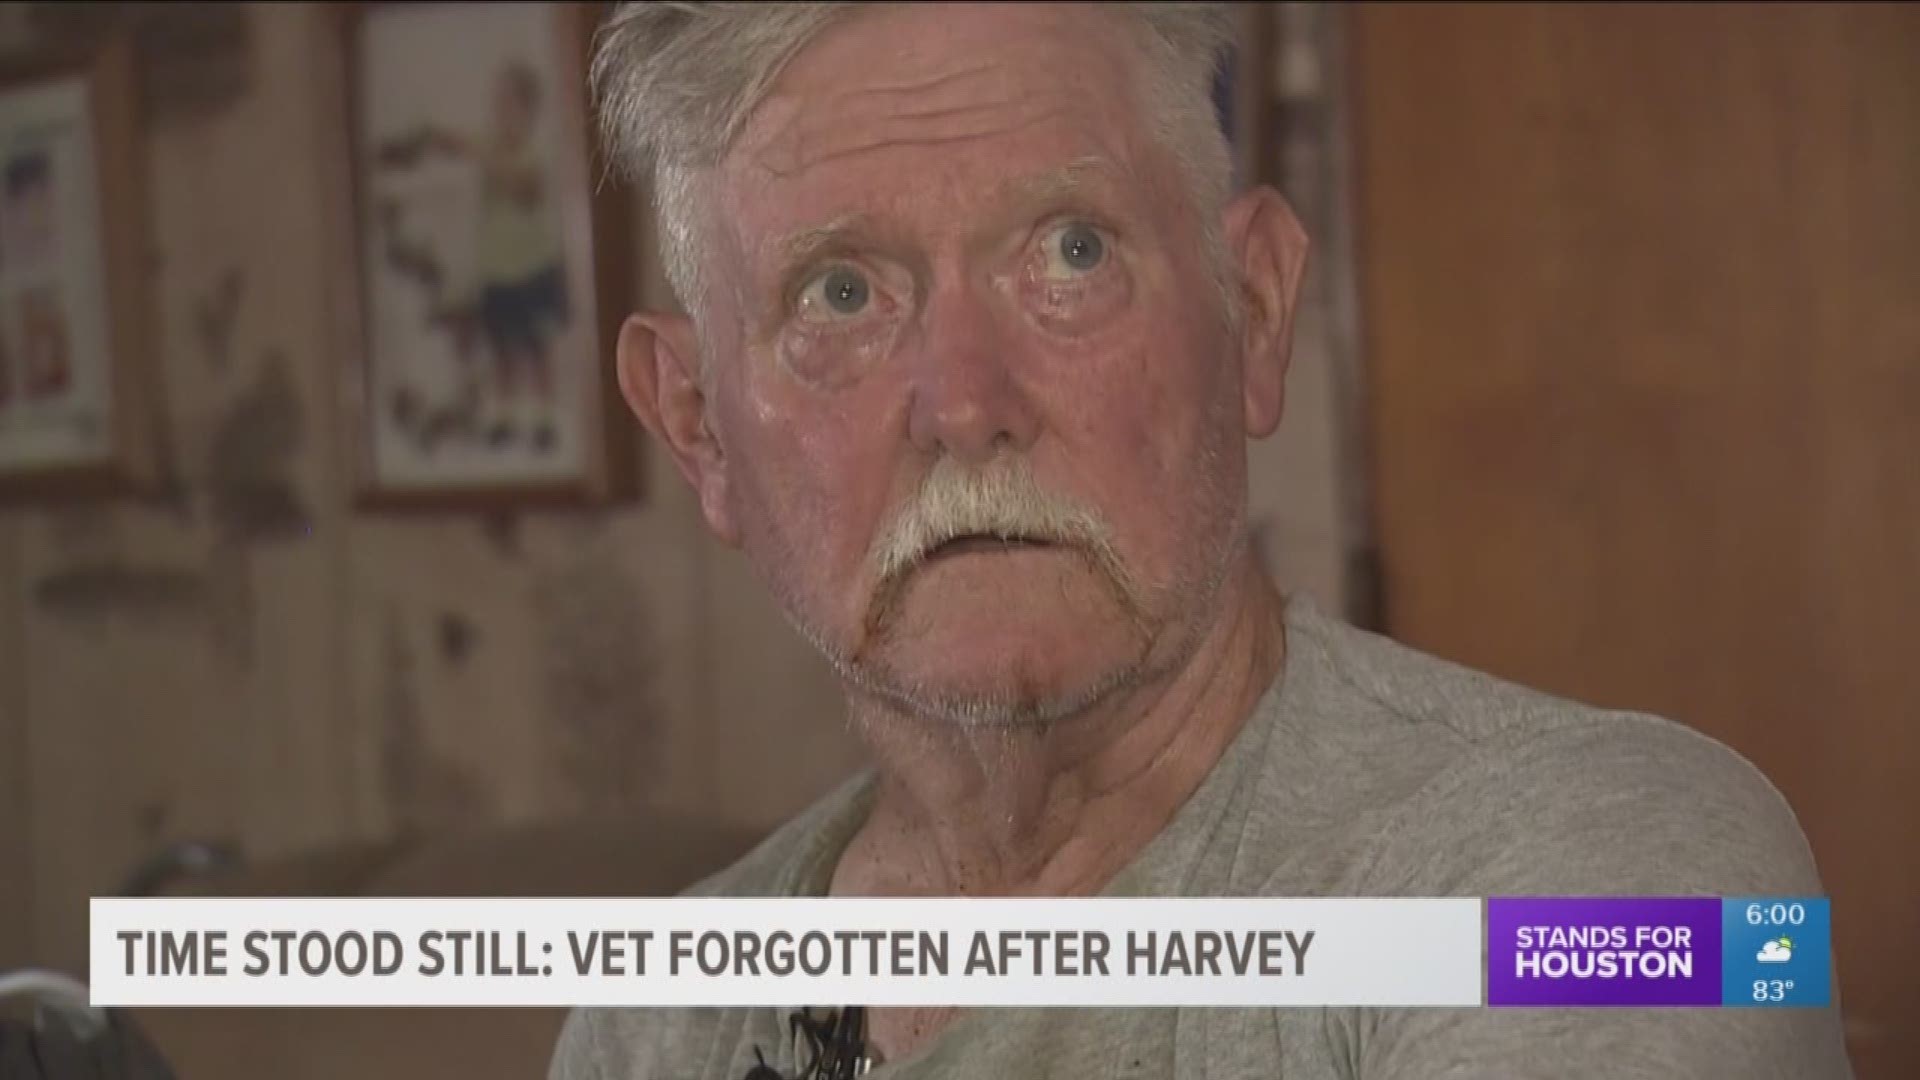 One veteran in Alvin says his home was never gutted or cleaned after Hurricane Harvey. His home is rotting.